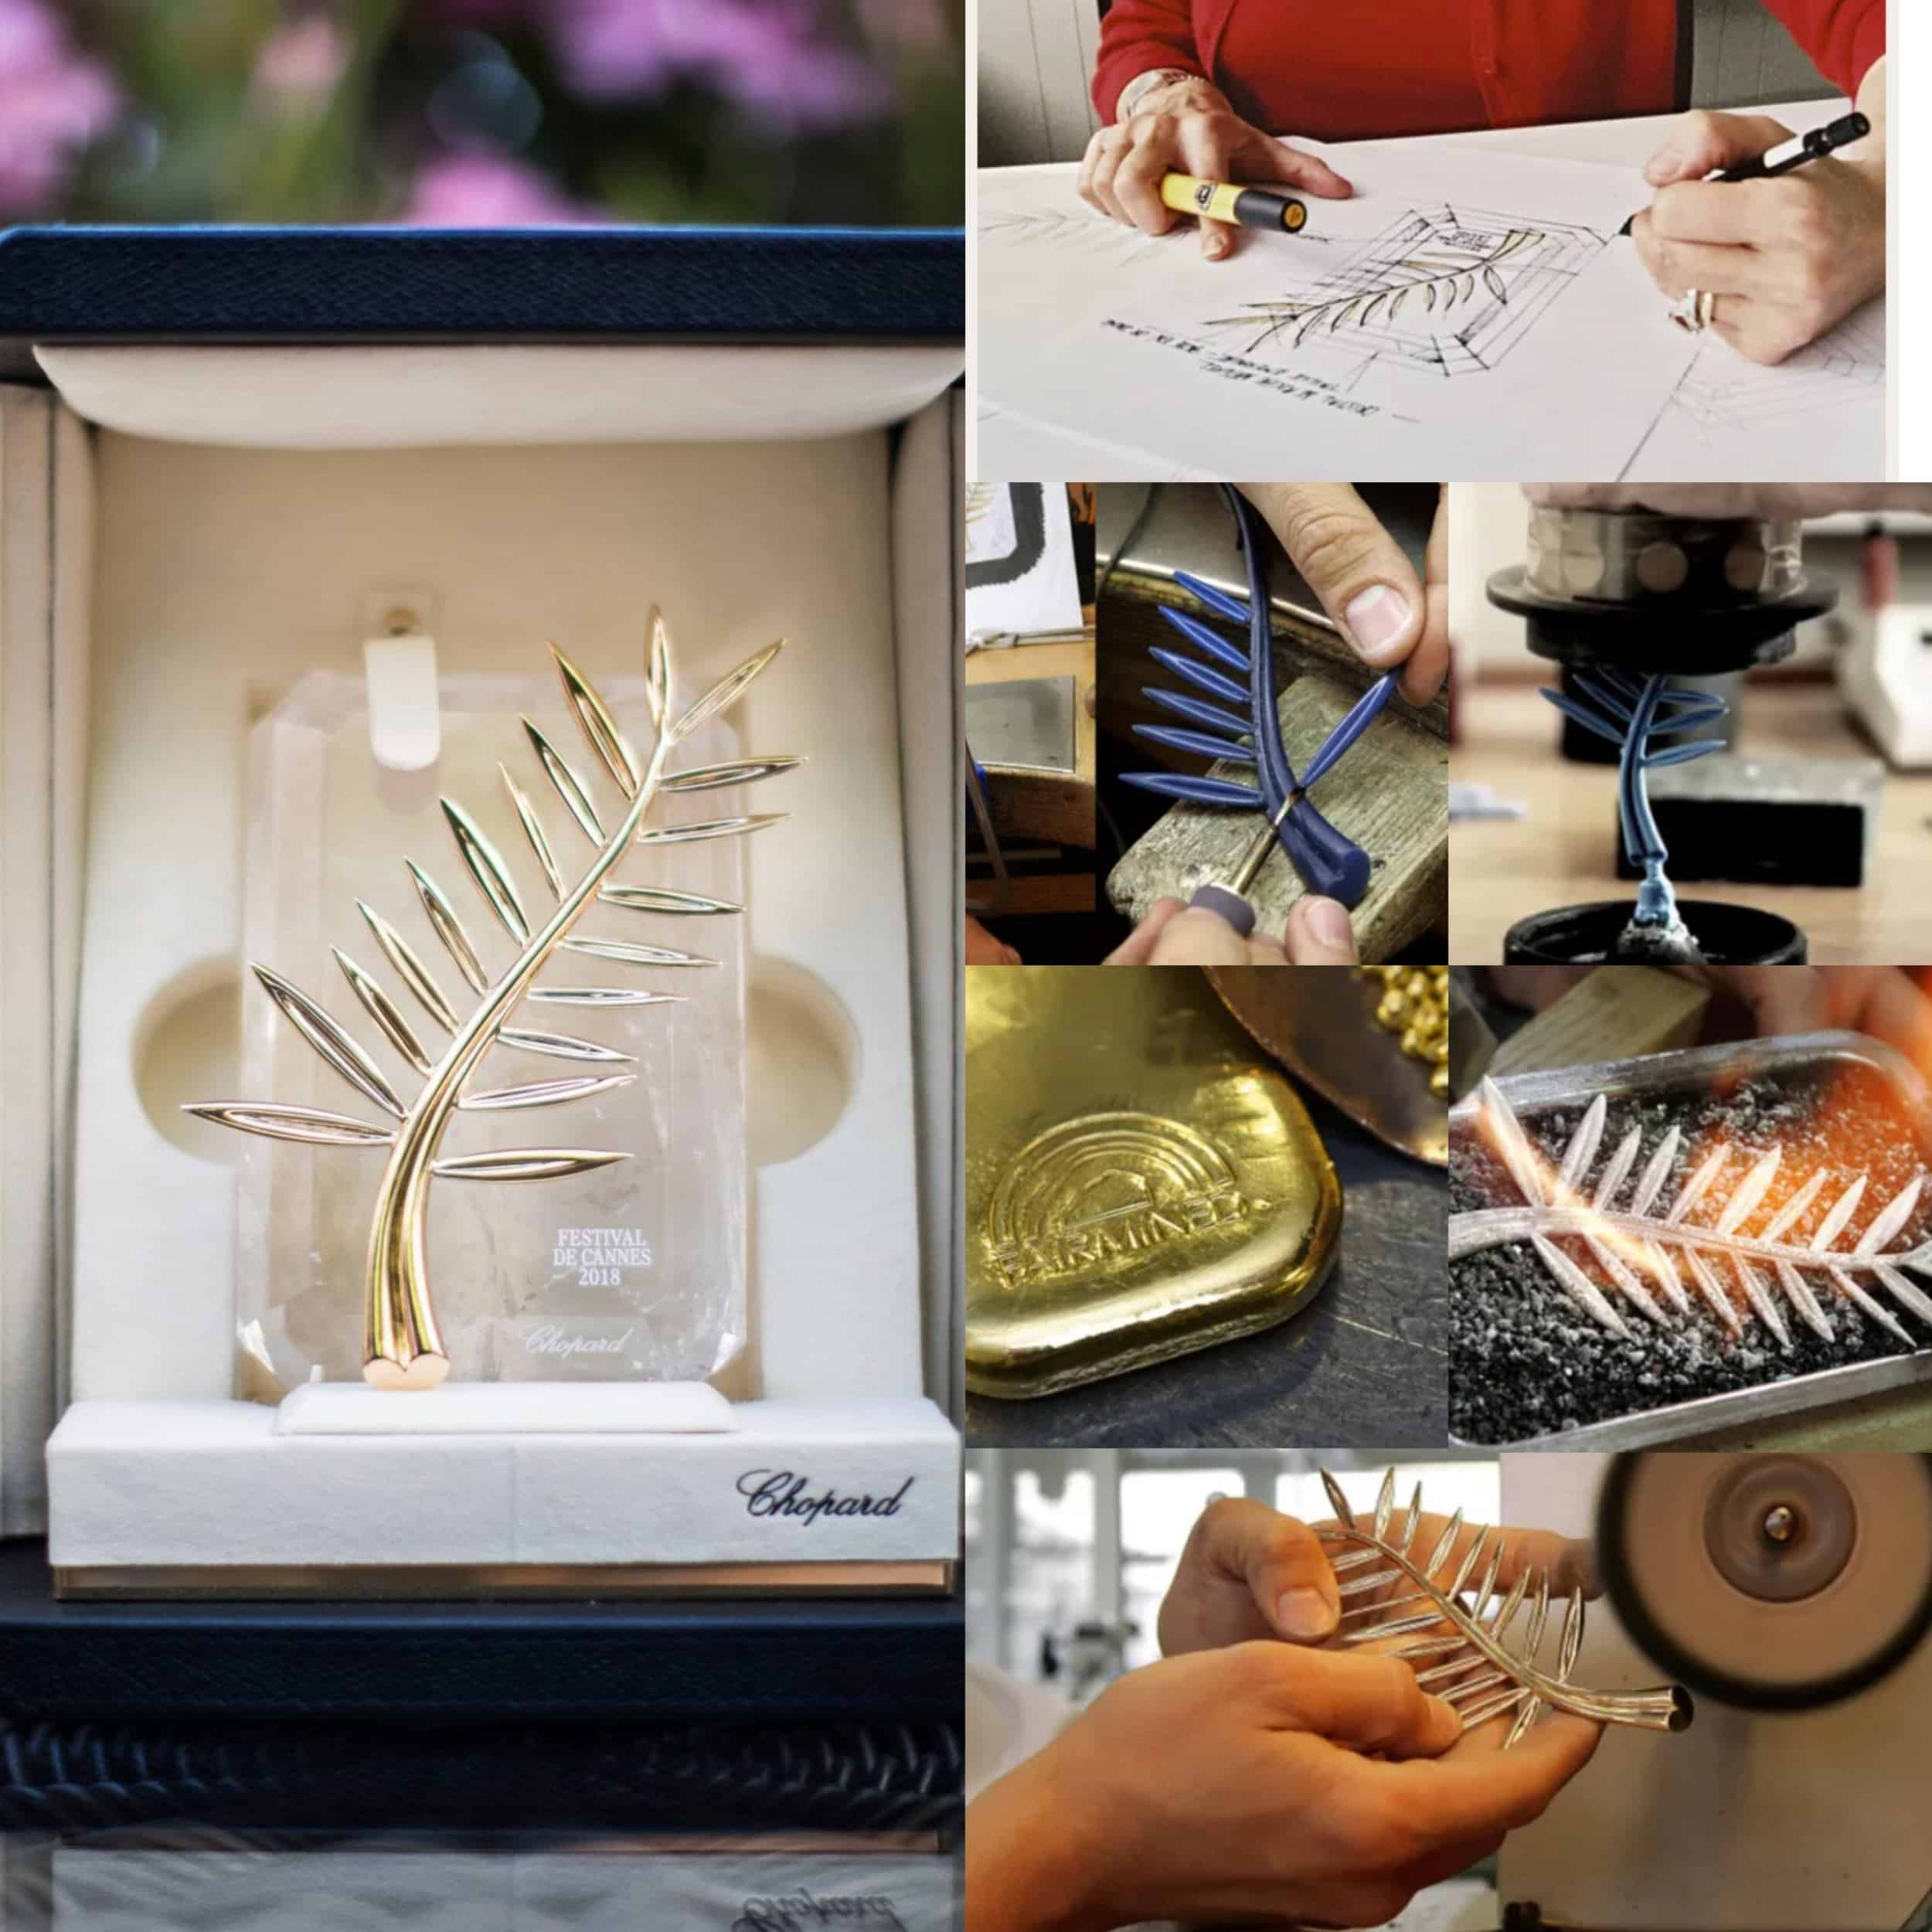 The Palme d'Or Manufacturing